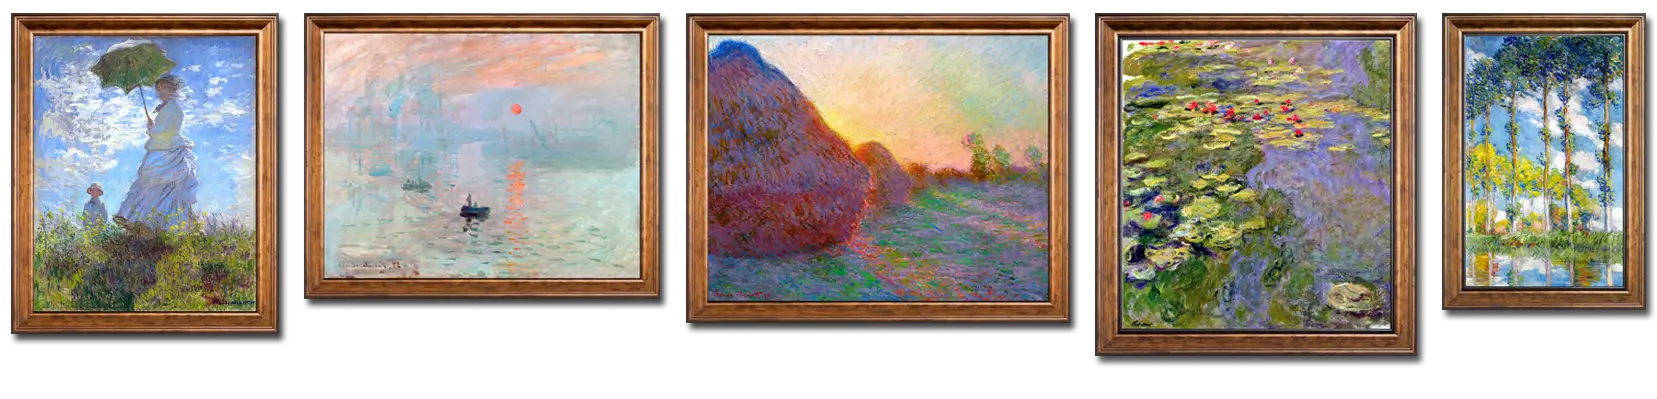 Claude Monet - Museum quality handmade oil painting reproductions